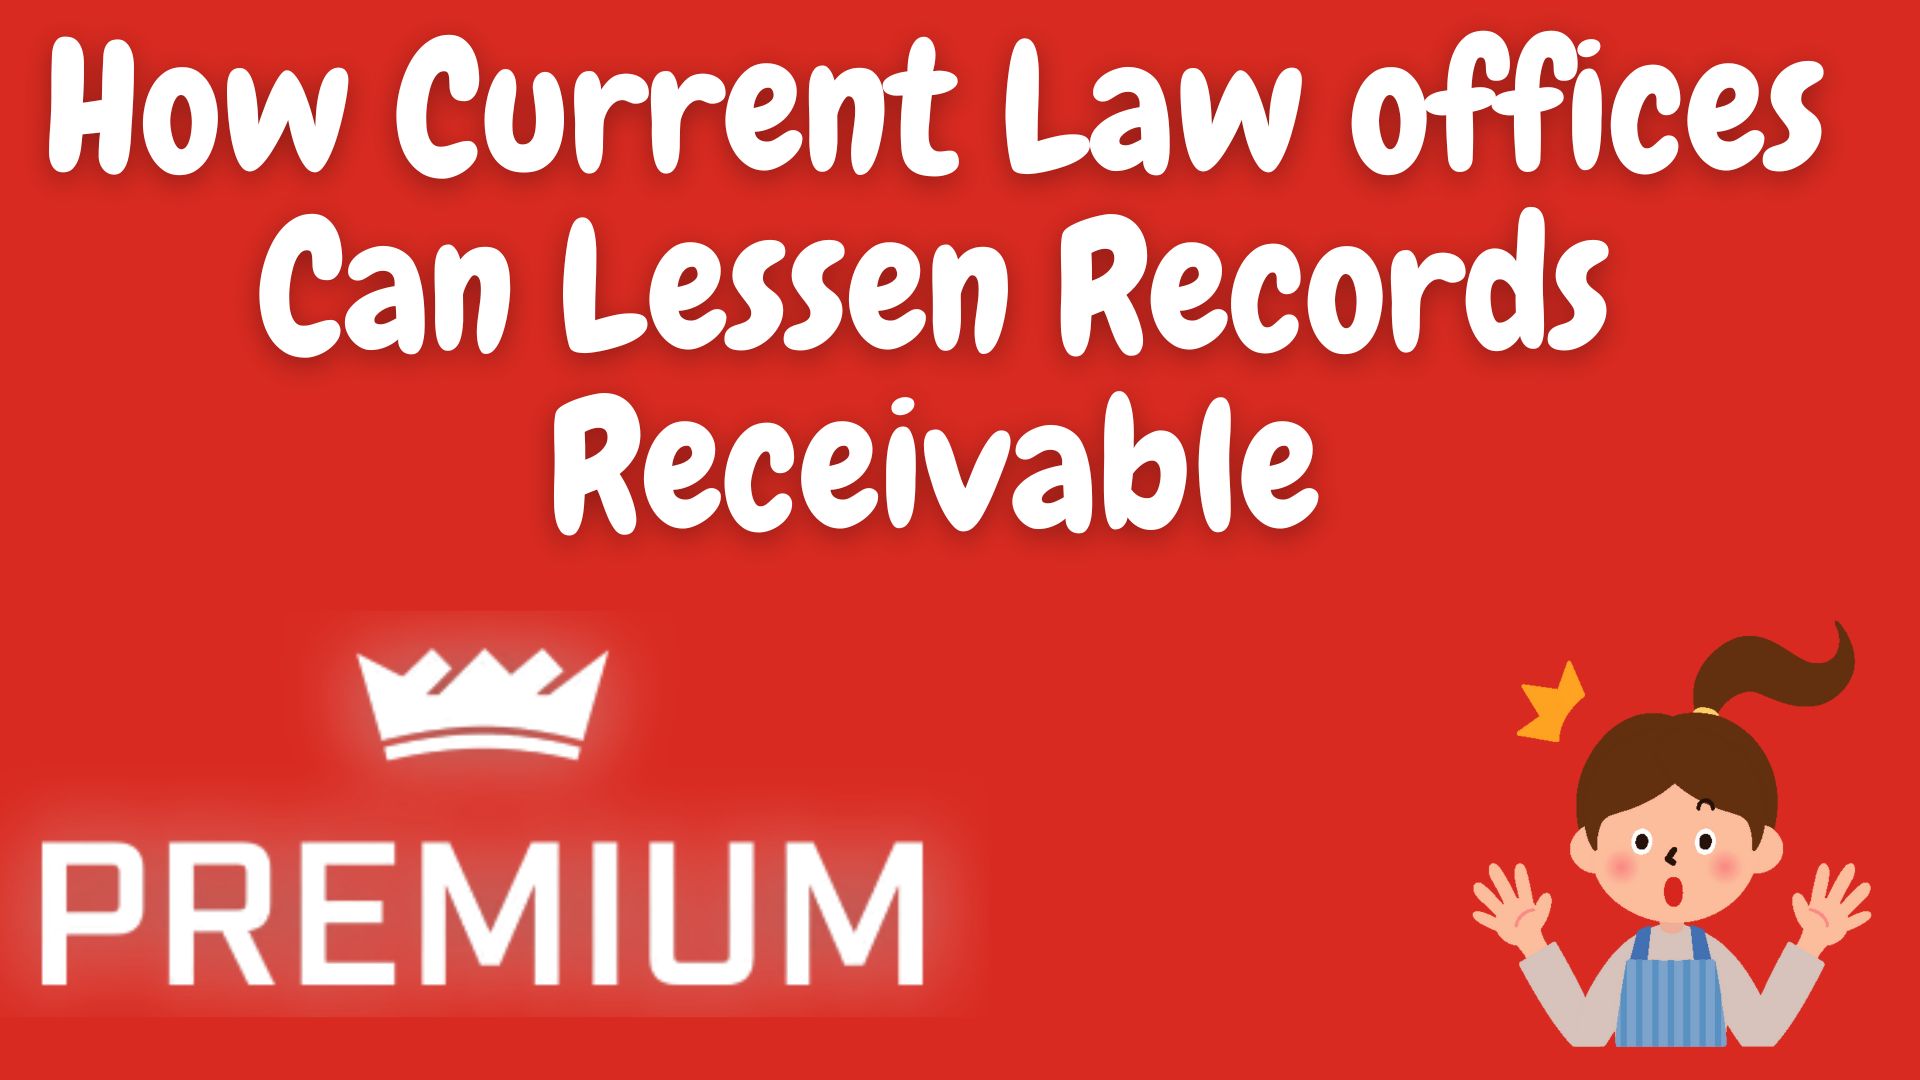 How current law offices can lessen records receivable 2022